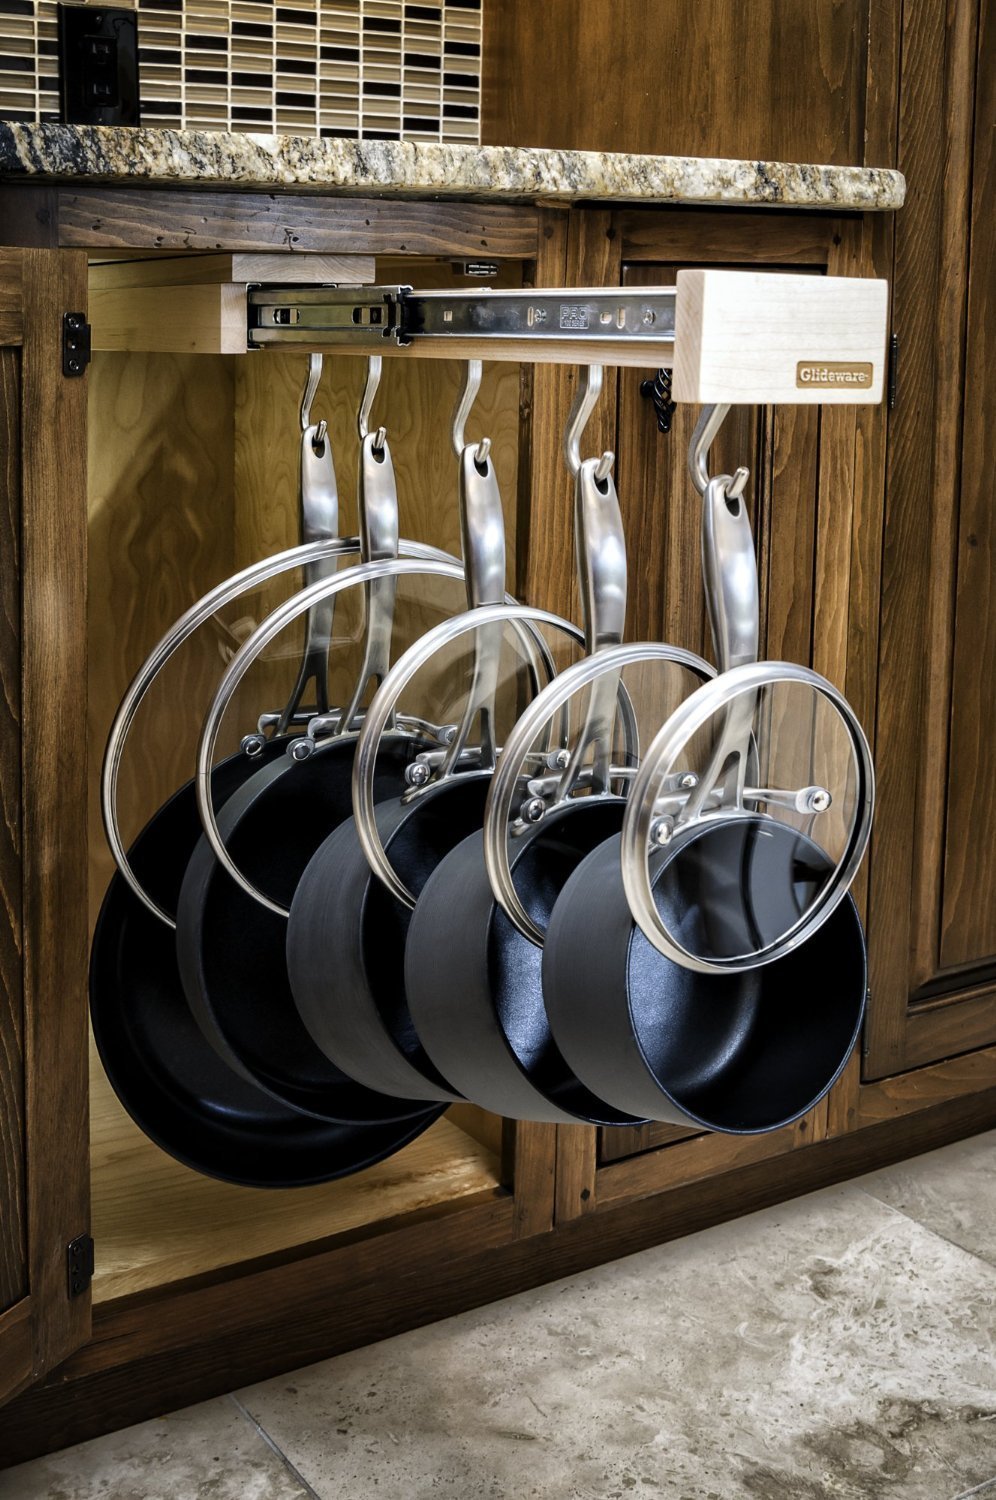 Organizing Pots And Pans Ideas Solutions, Hanging Pot Rack Under Cabinet